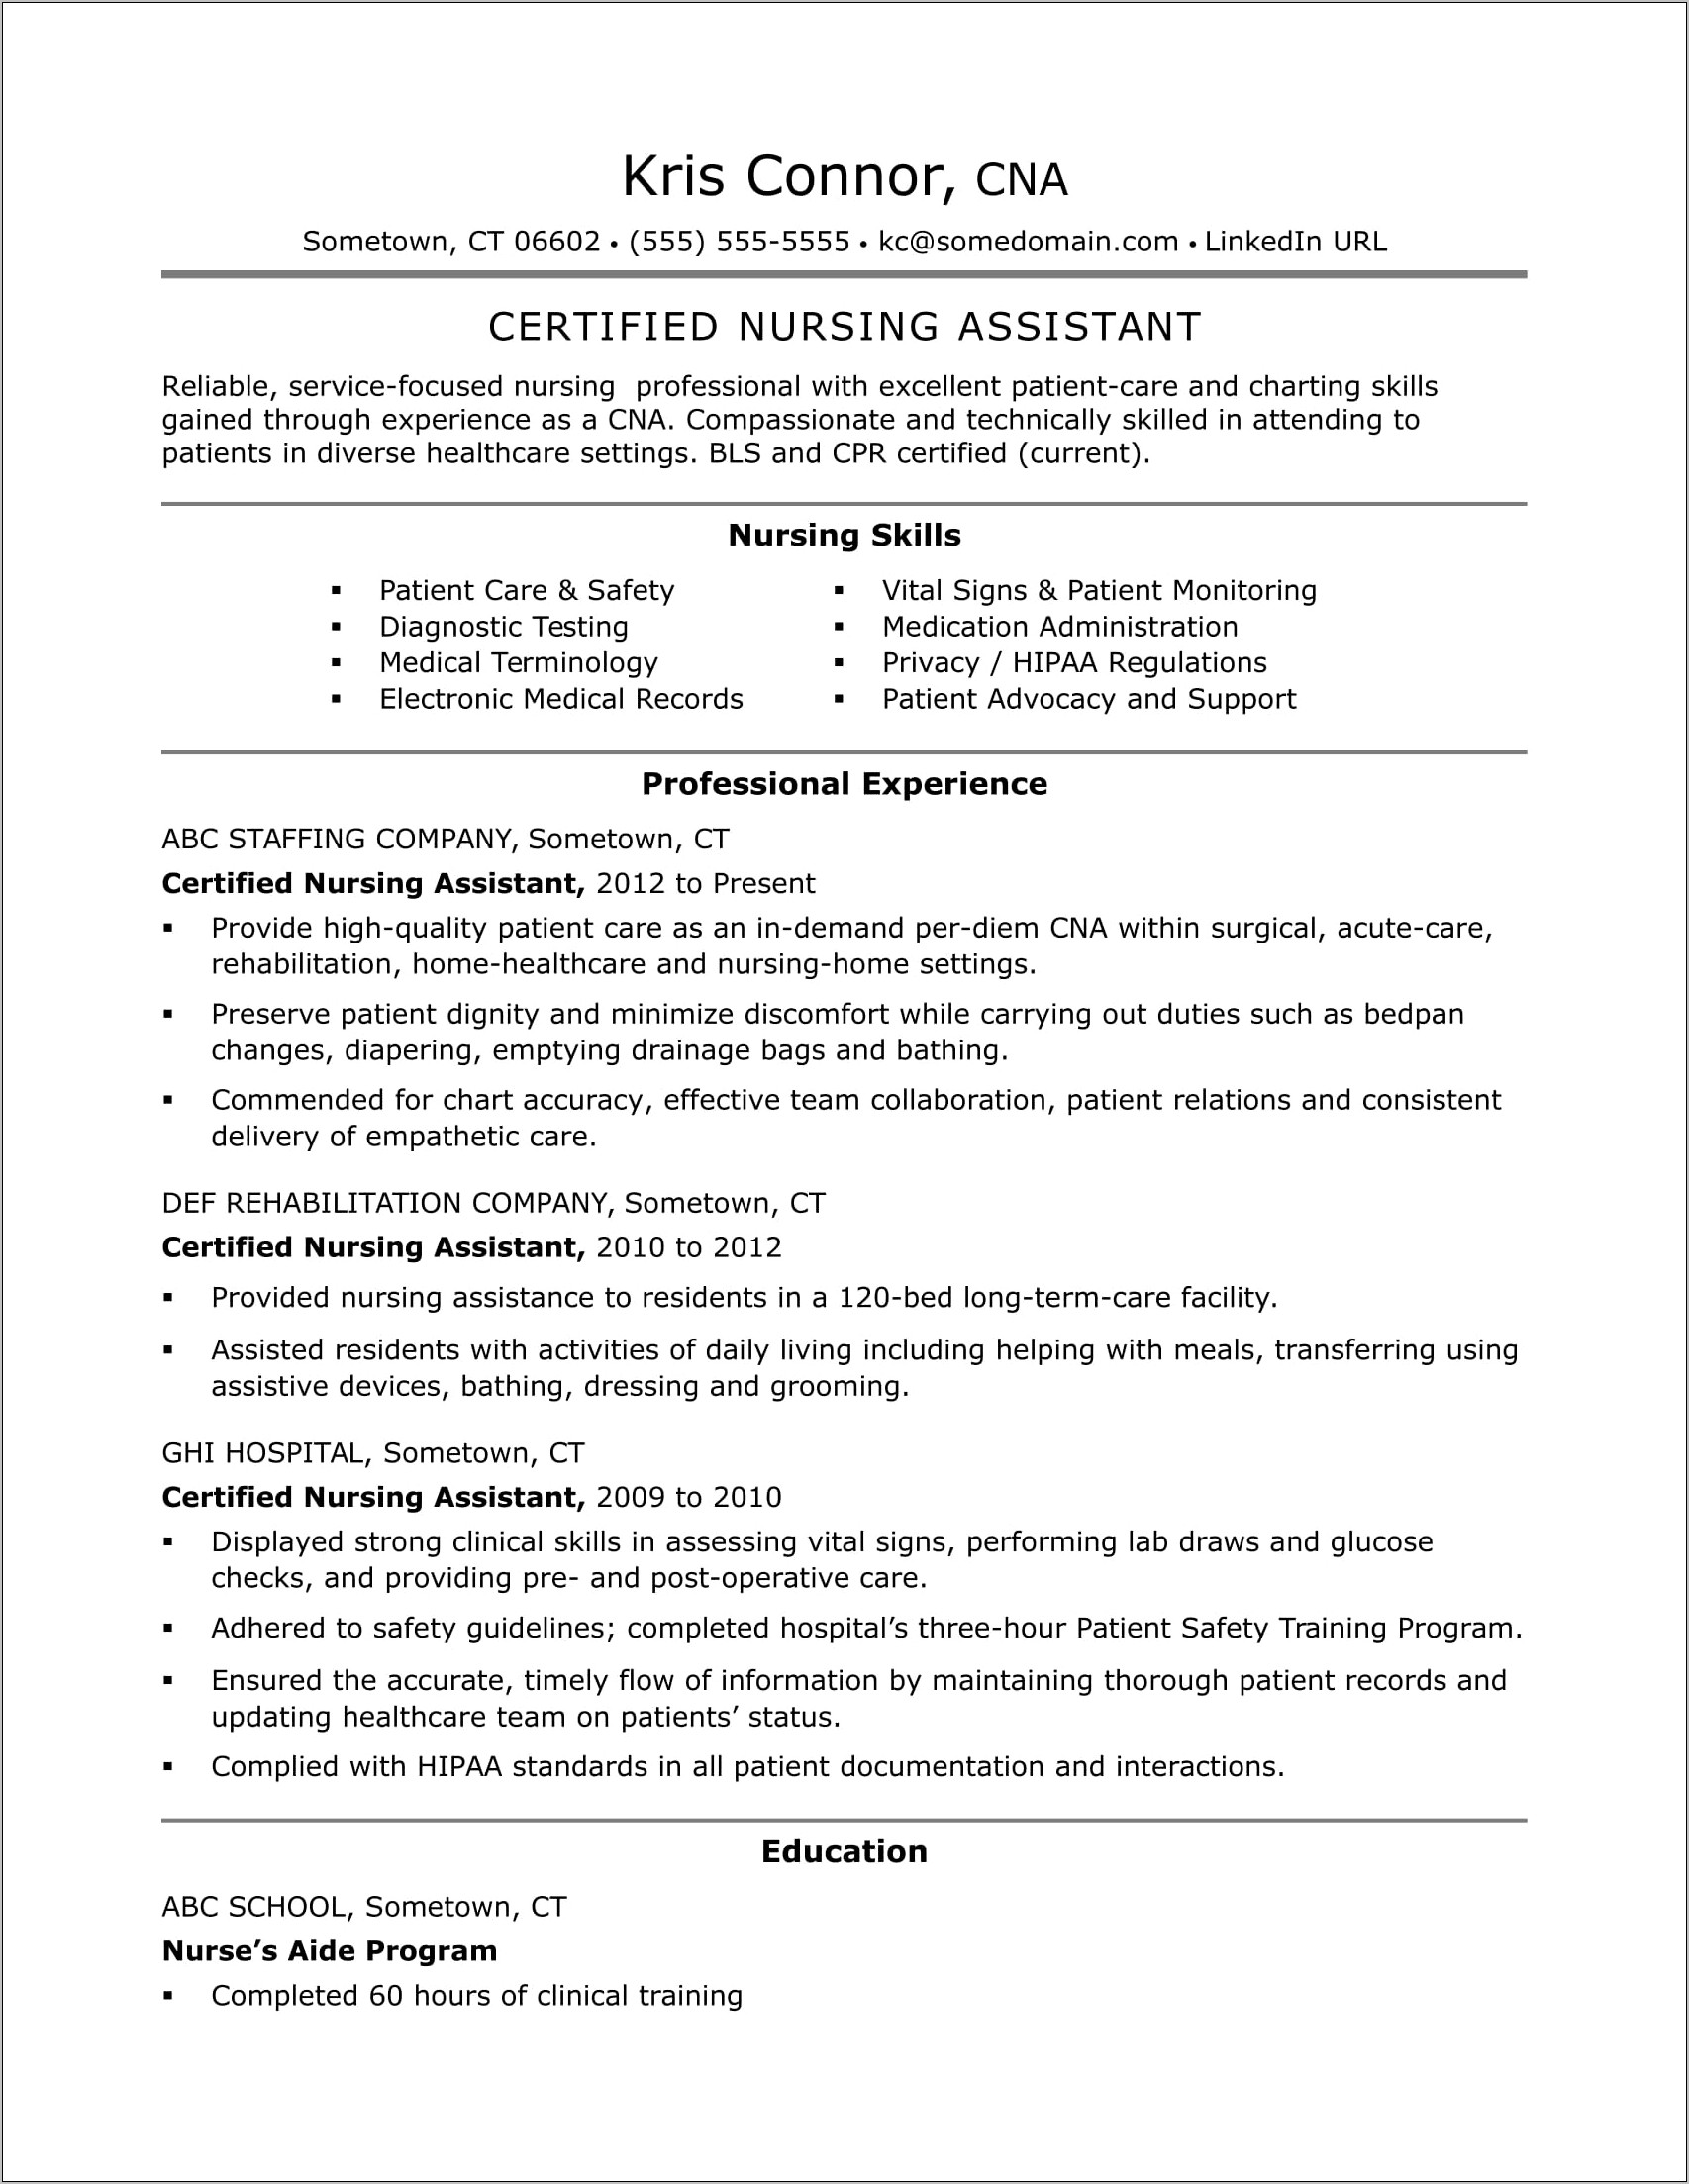 Current Education On Resume Examples